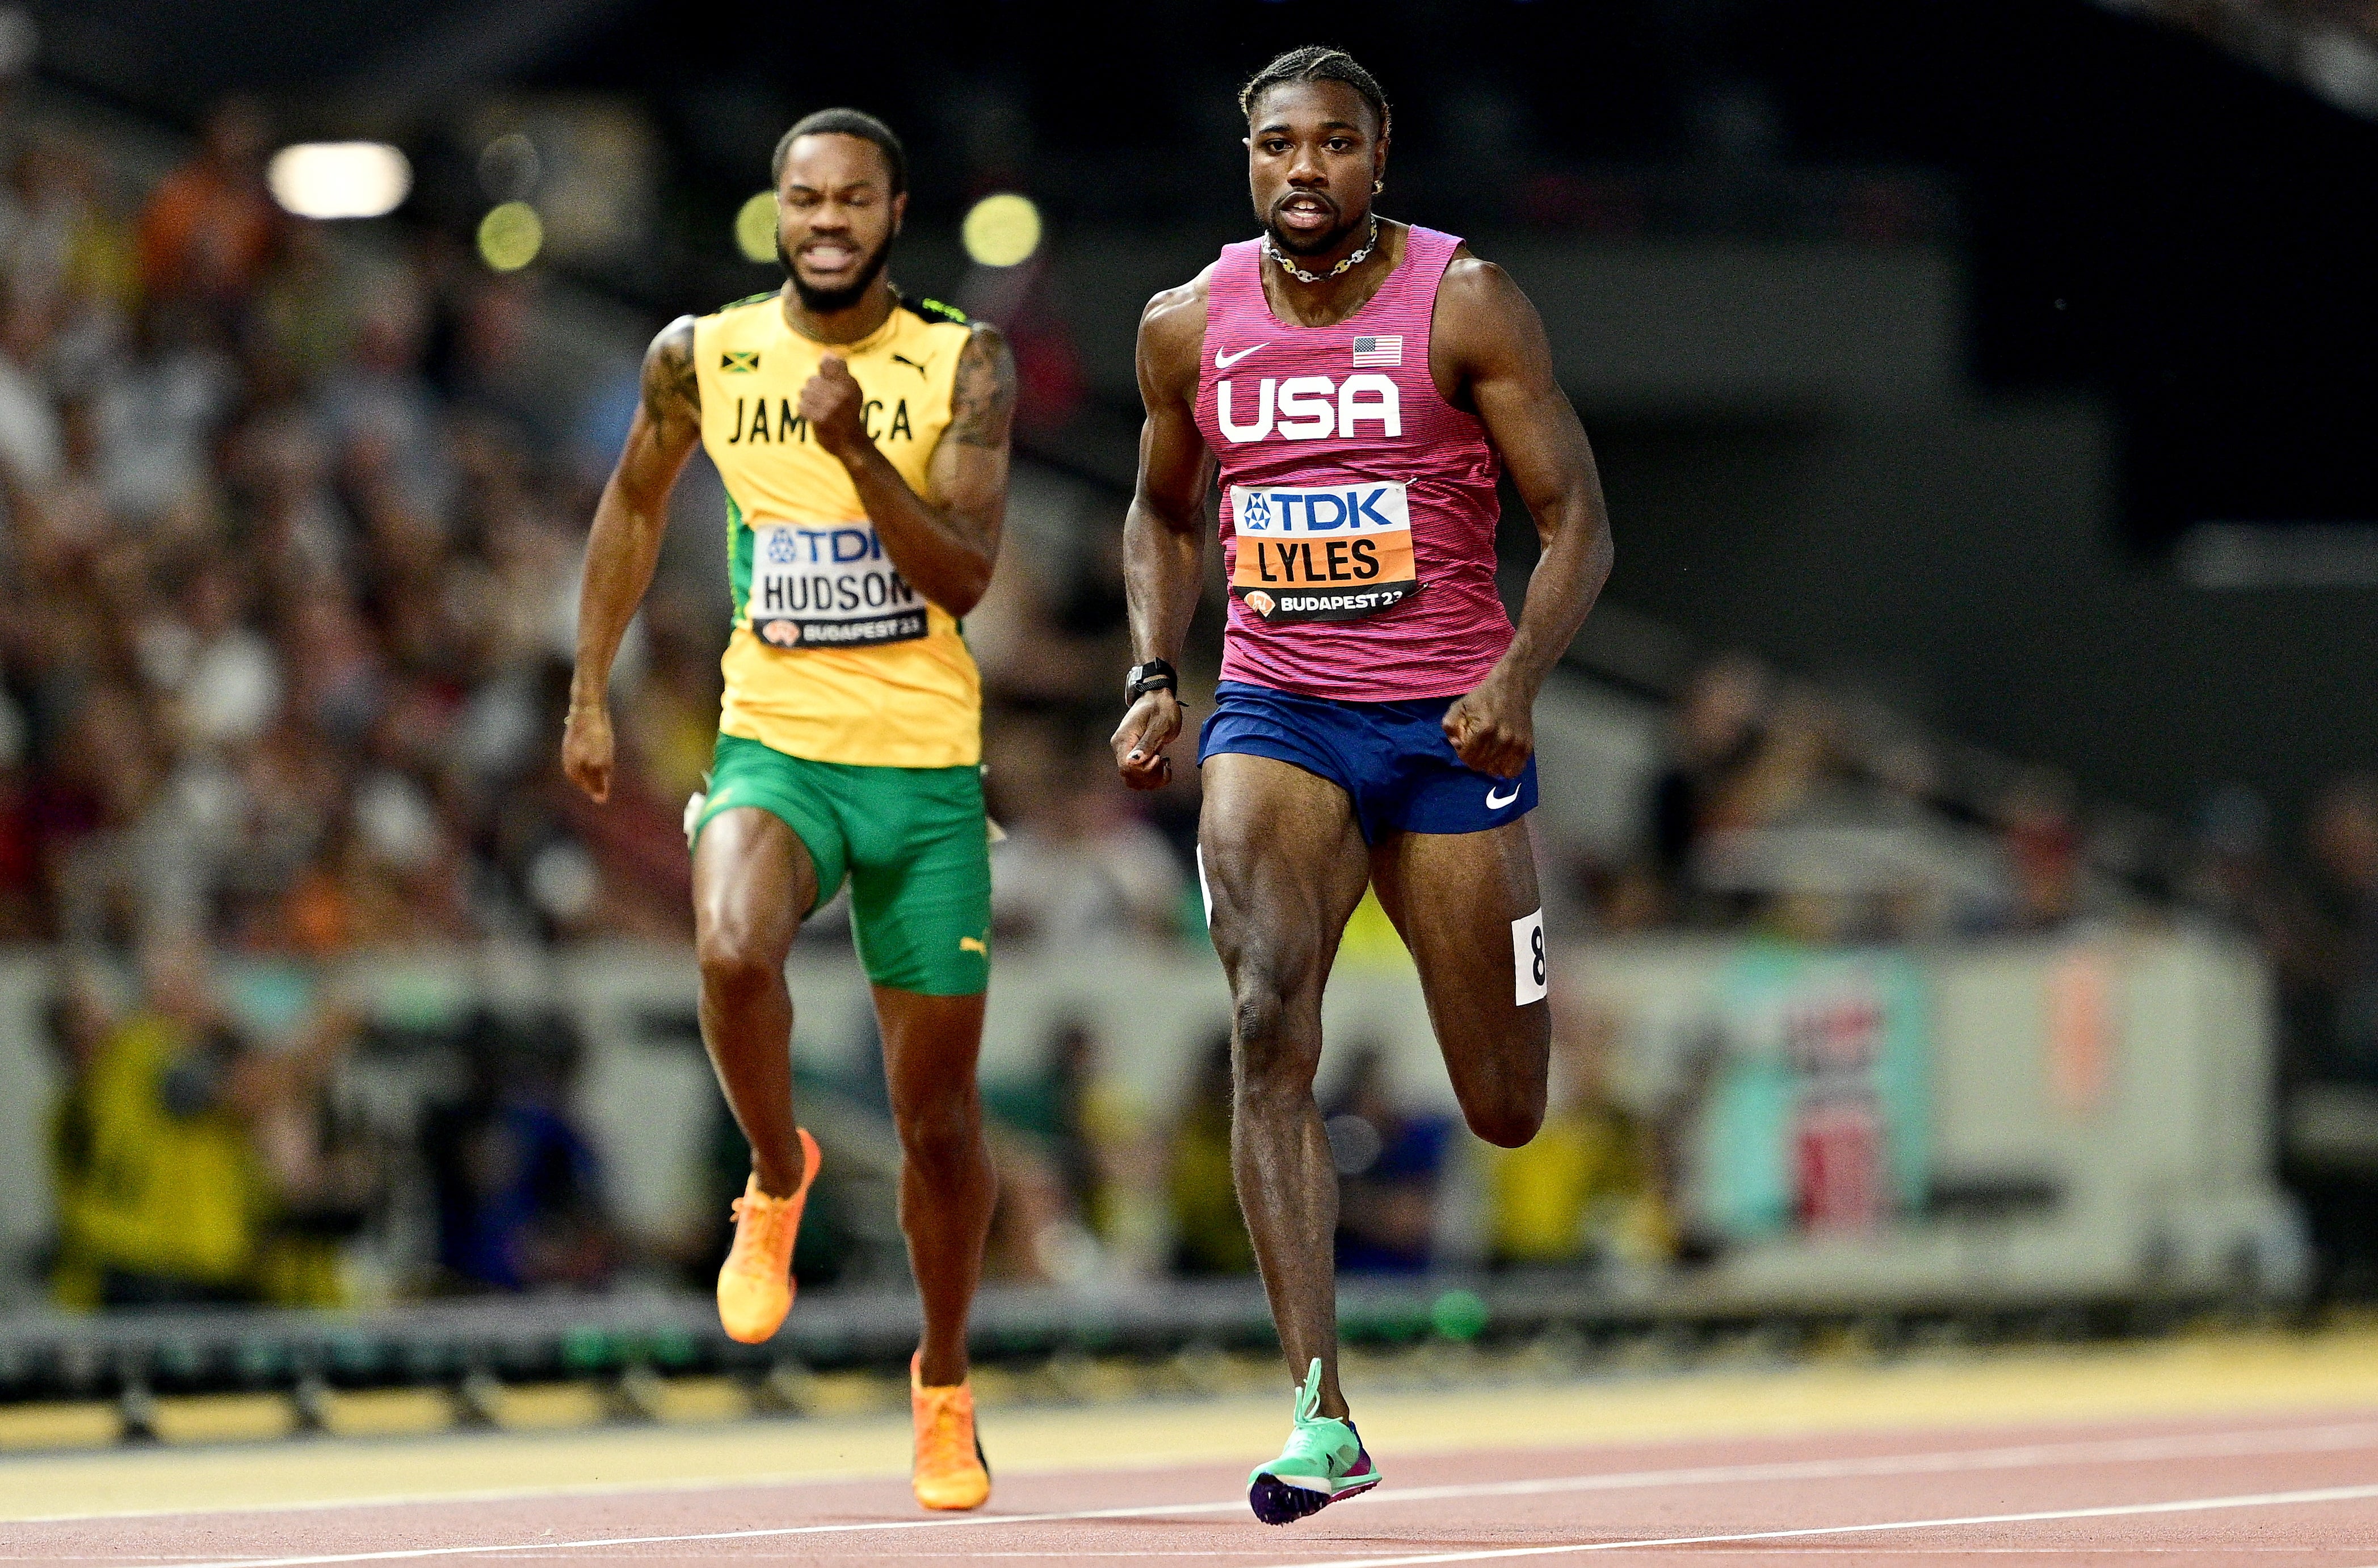 Noah Lyles finished the semi-final in first, with Hudson fifth